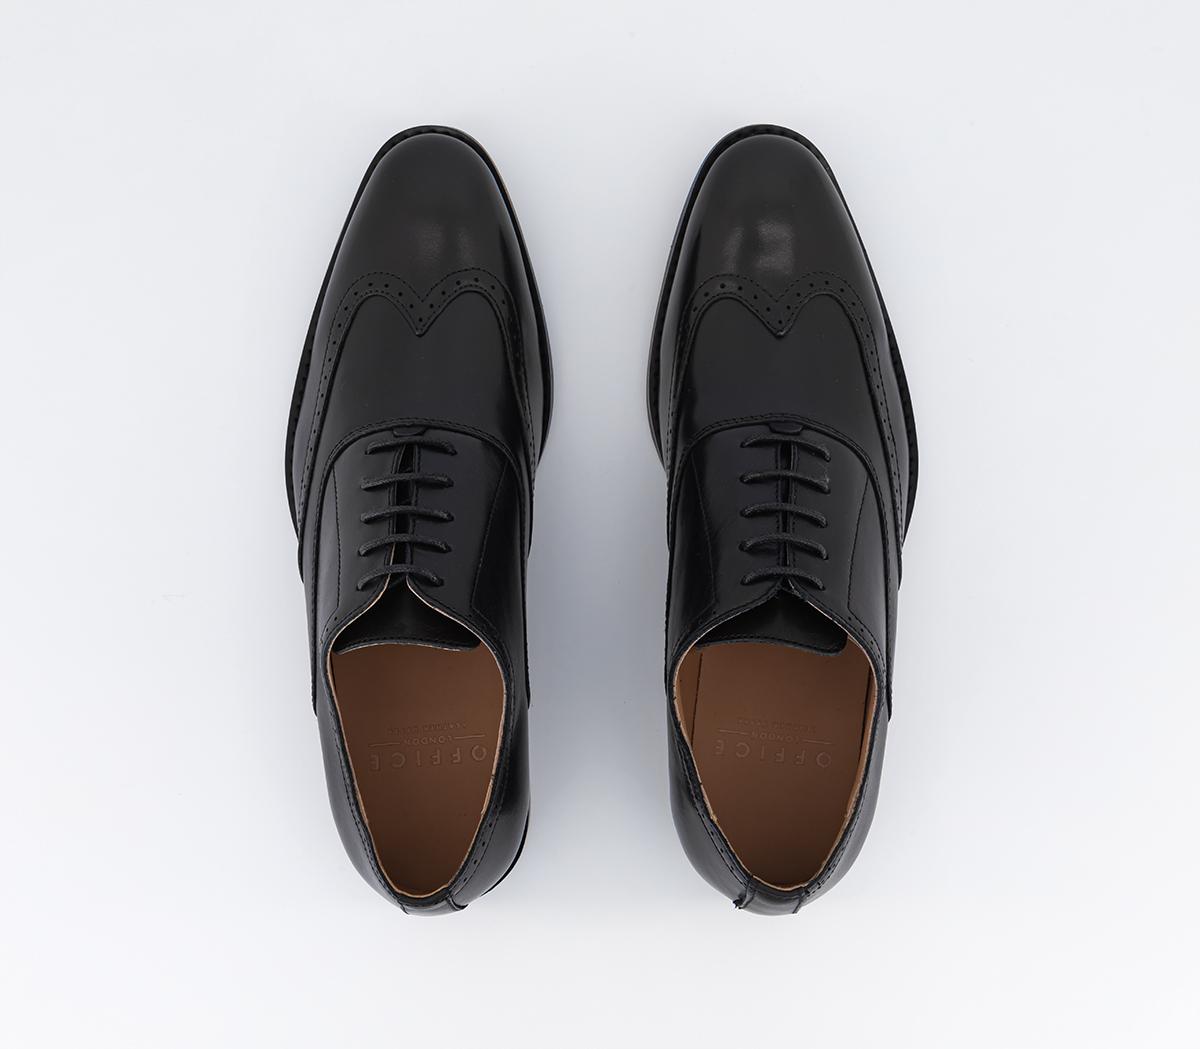 OFFICE Marshall Oxford Wingcap Brogues Black Leather - Men’s Smart Shoes